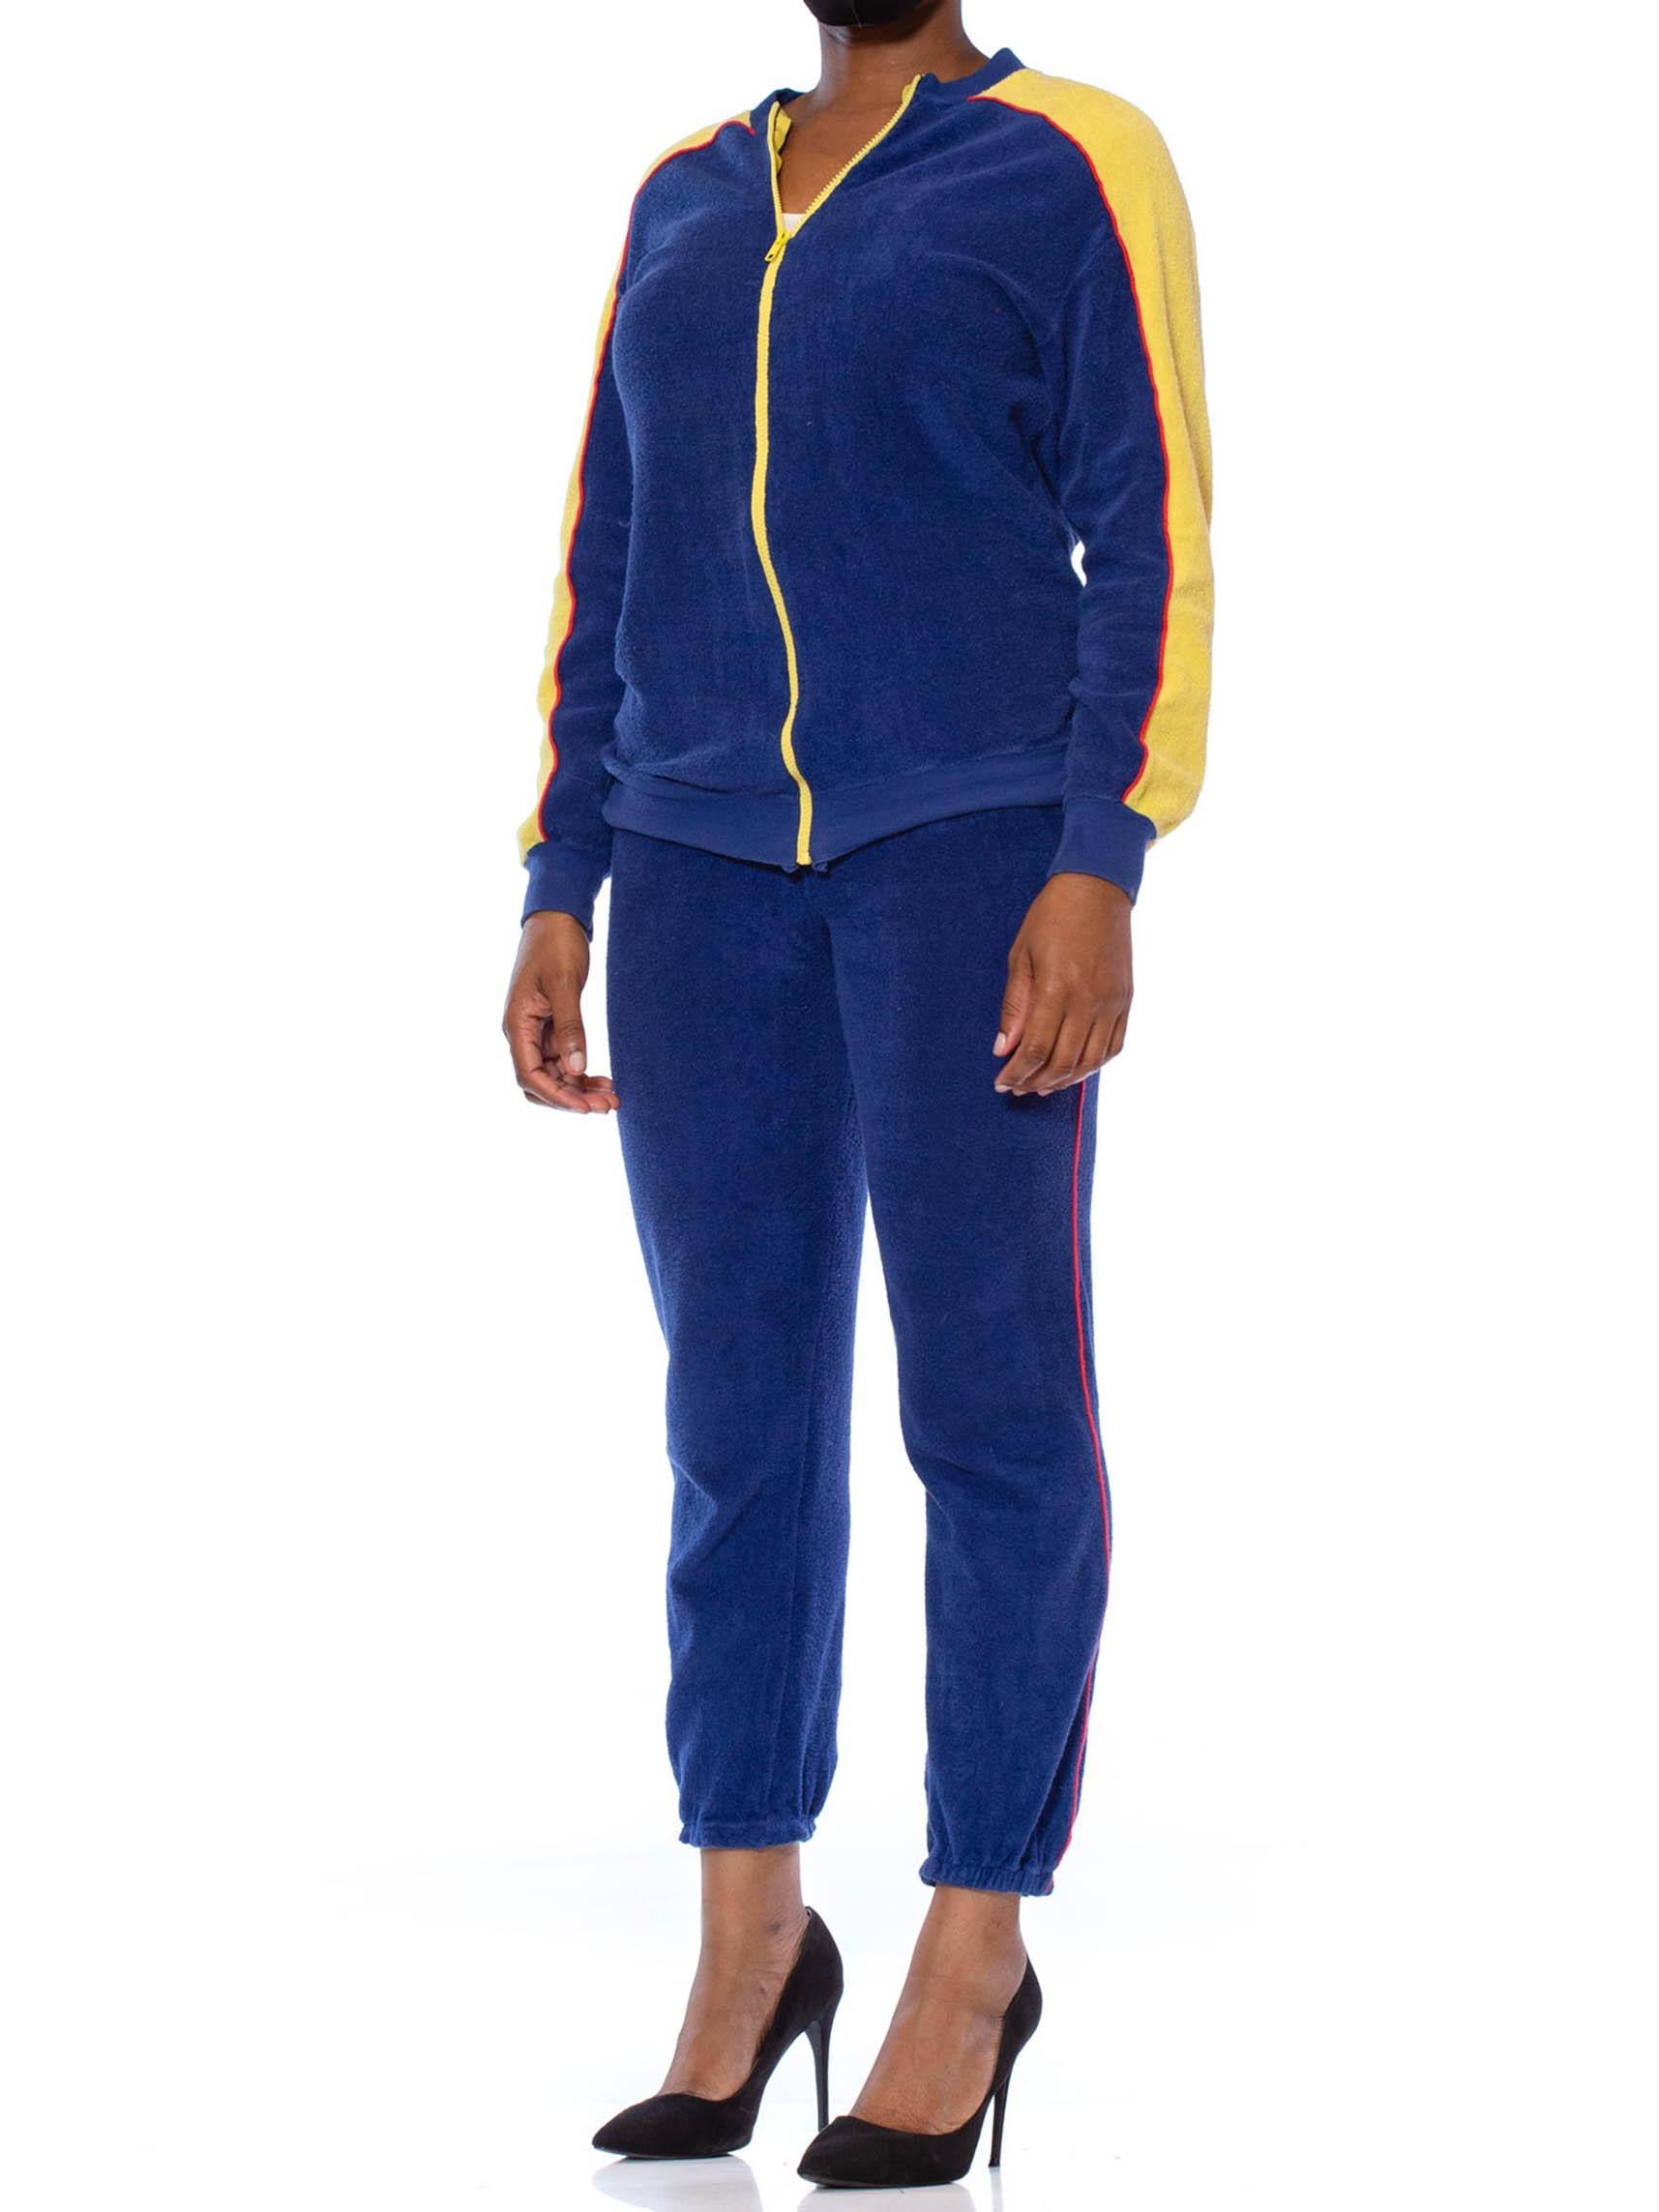 yellow and blue tracksuit